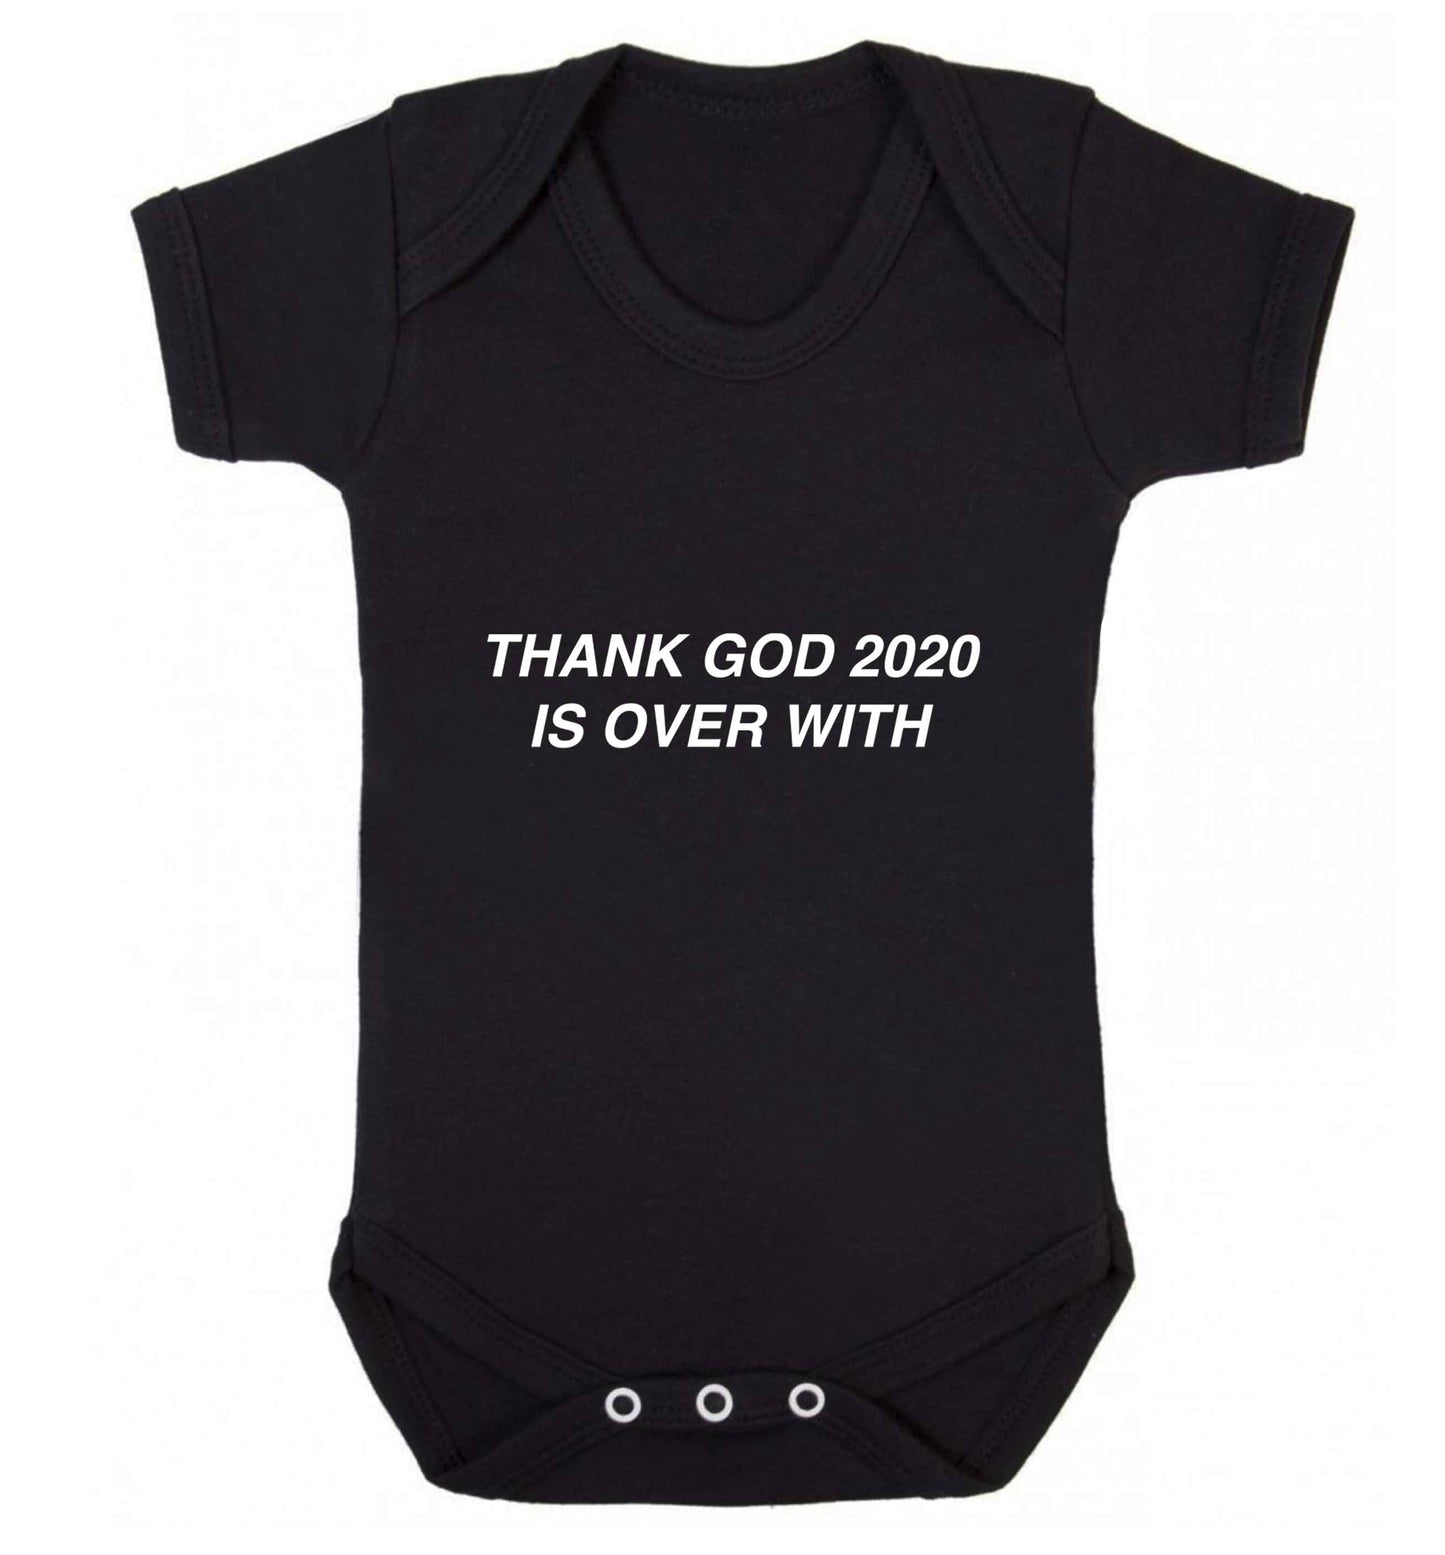 Thank god 2020 is over with baby vest black 18-24 months